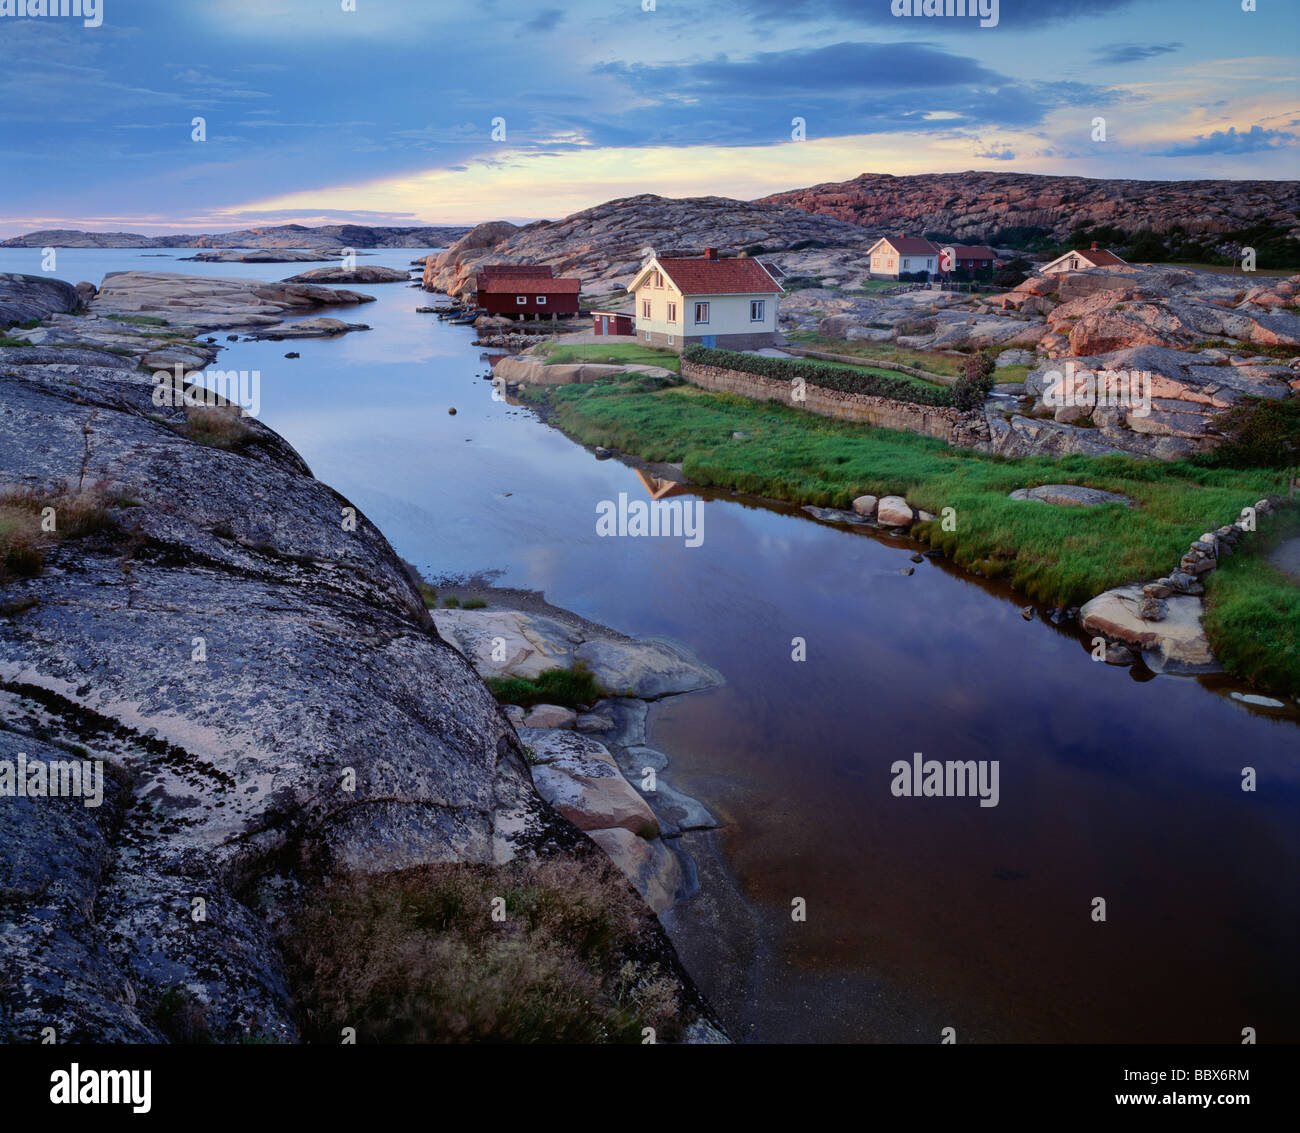 Houses on riverbank amidst rock formations Stock Photo